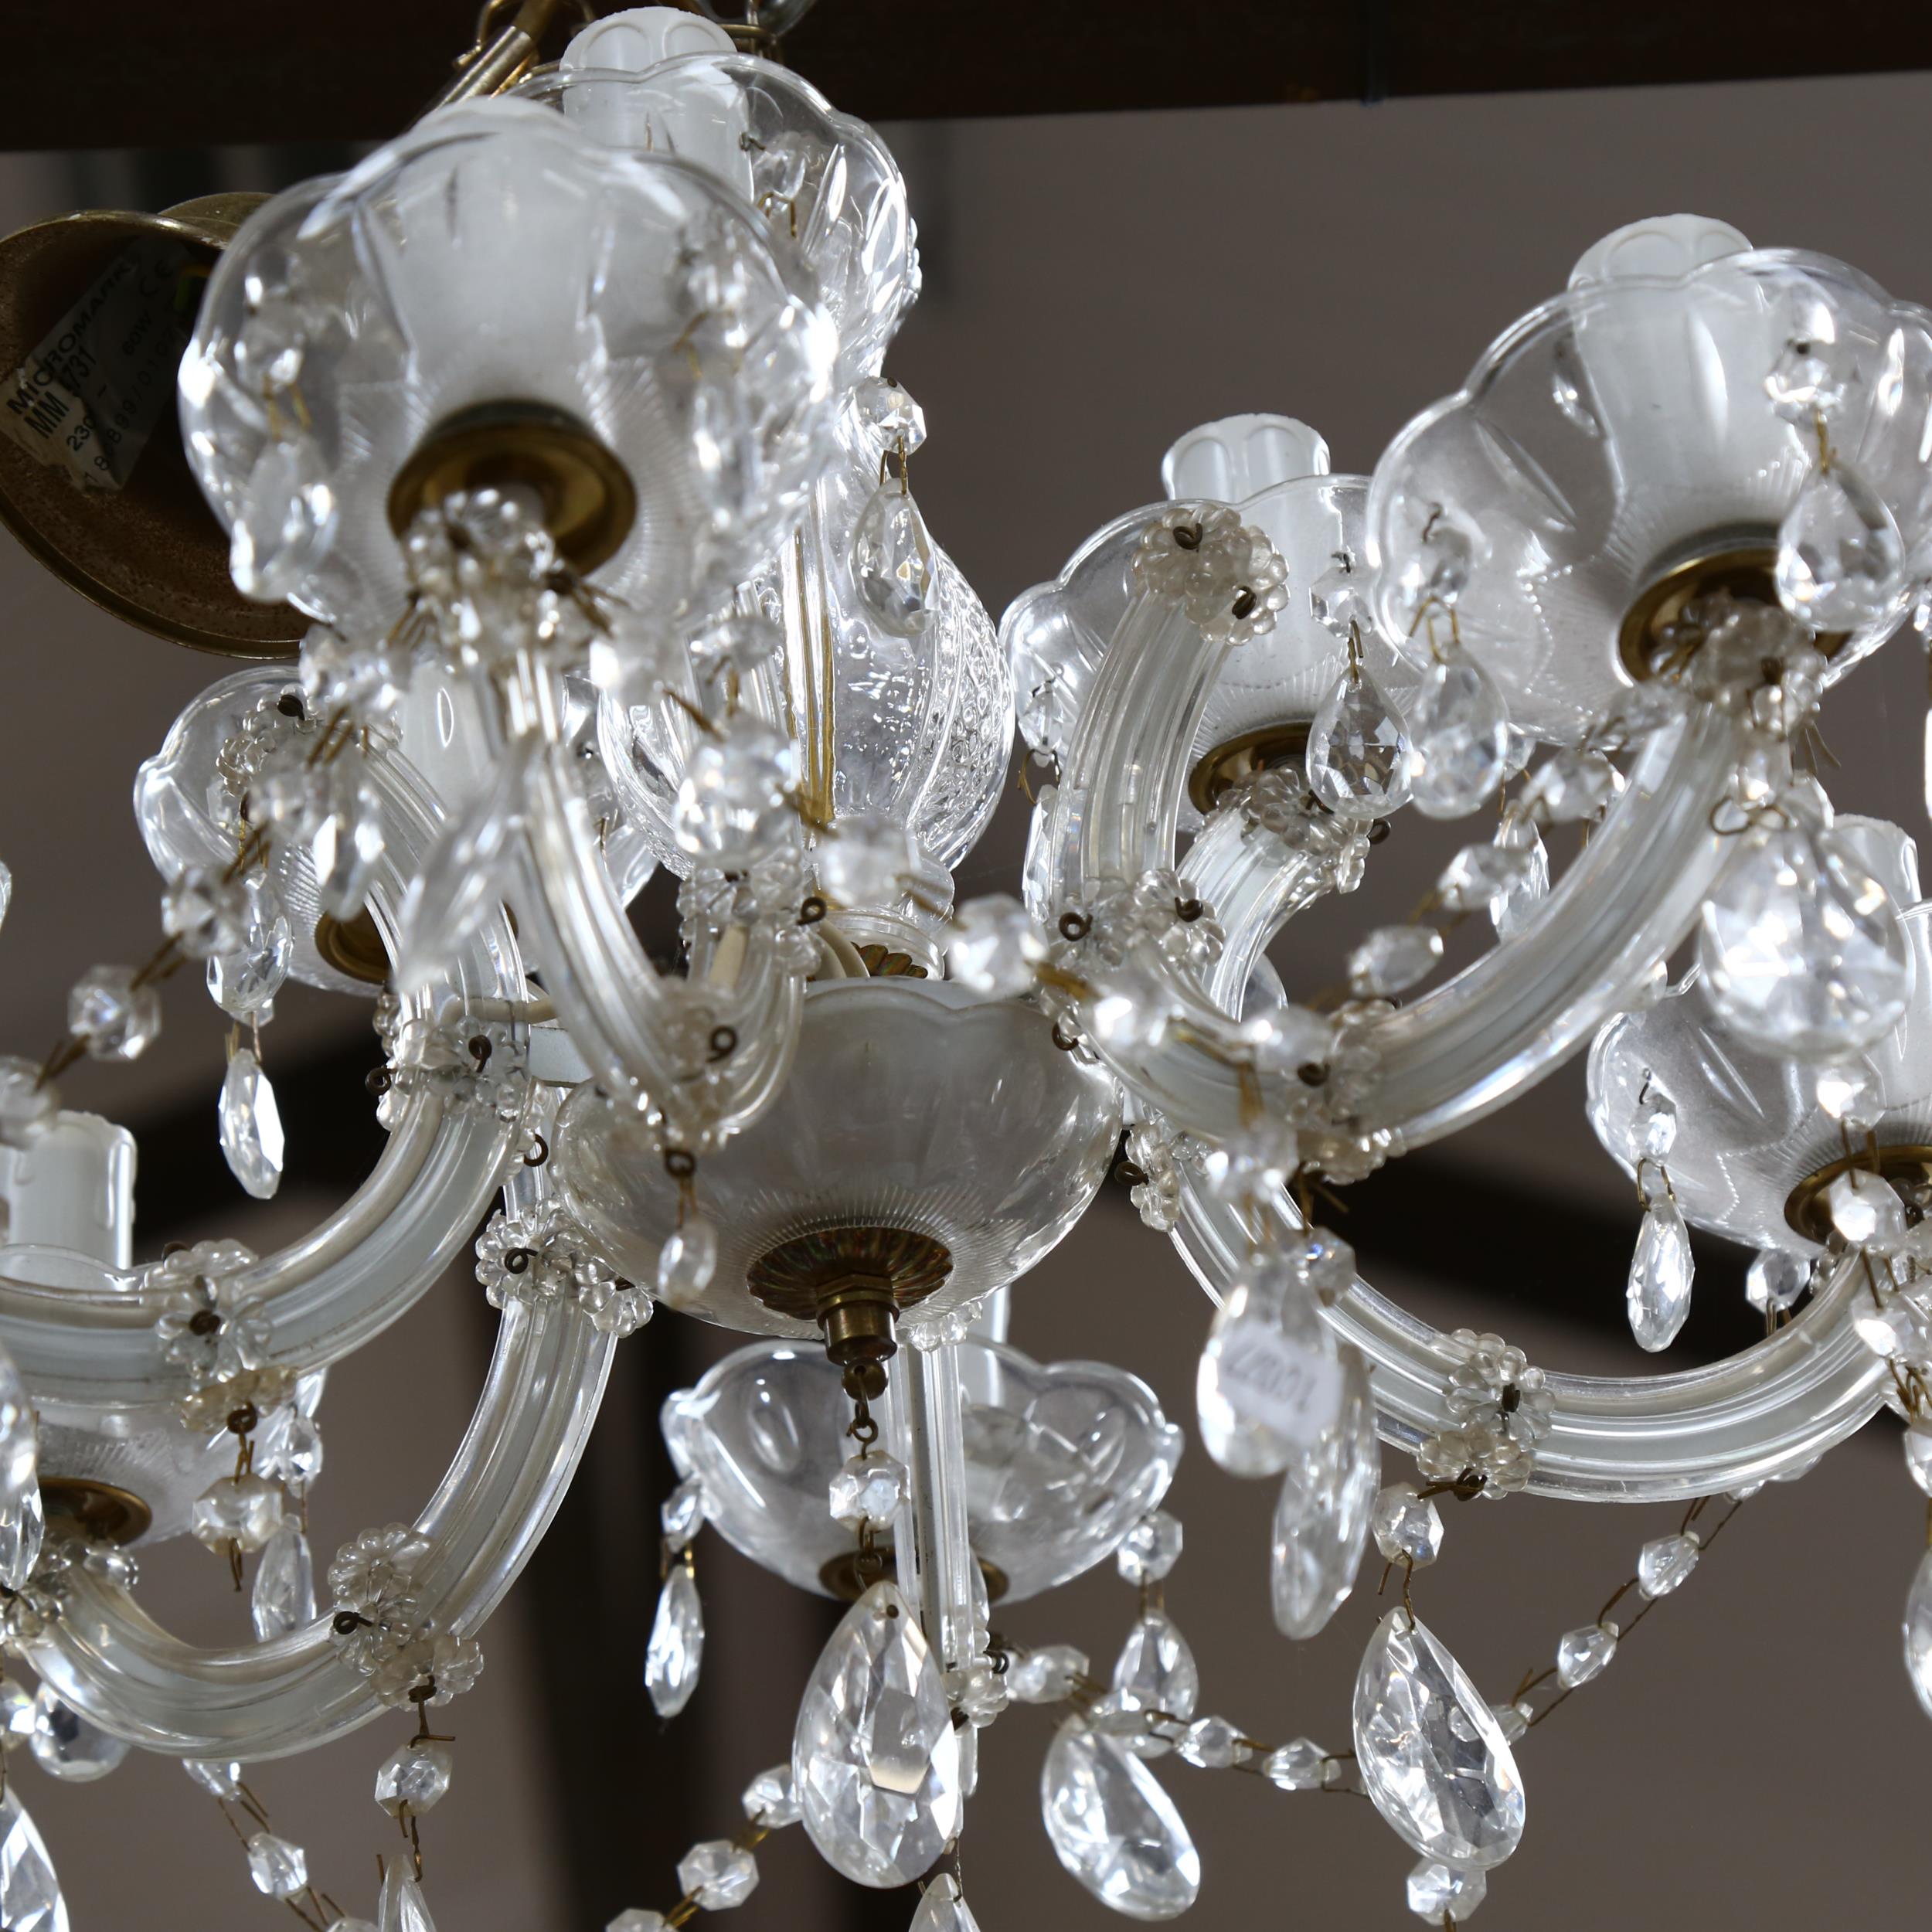 Vintage 6-brand glass chandelier with lustre drops - Image 2 of 2